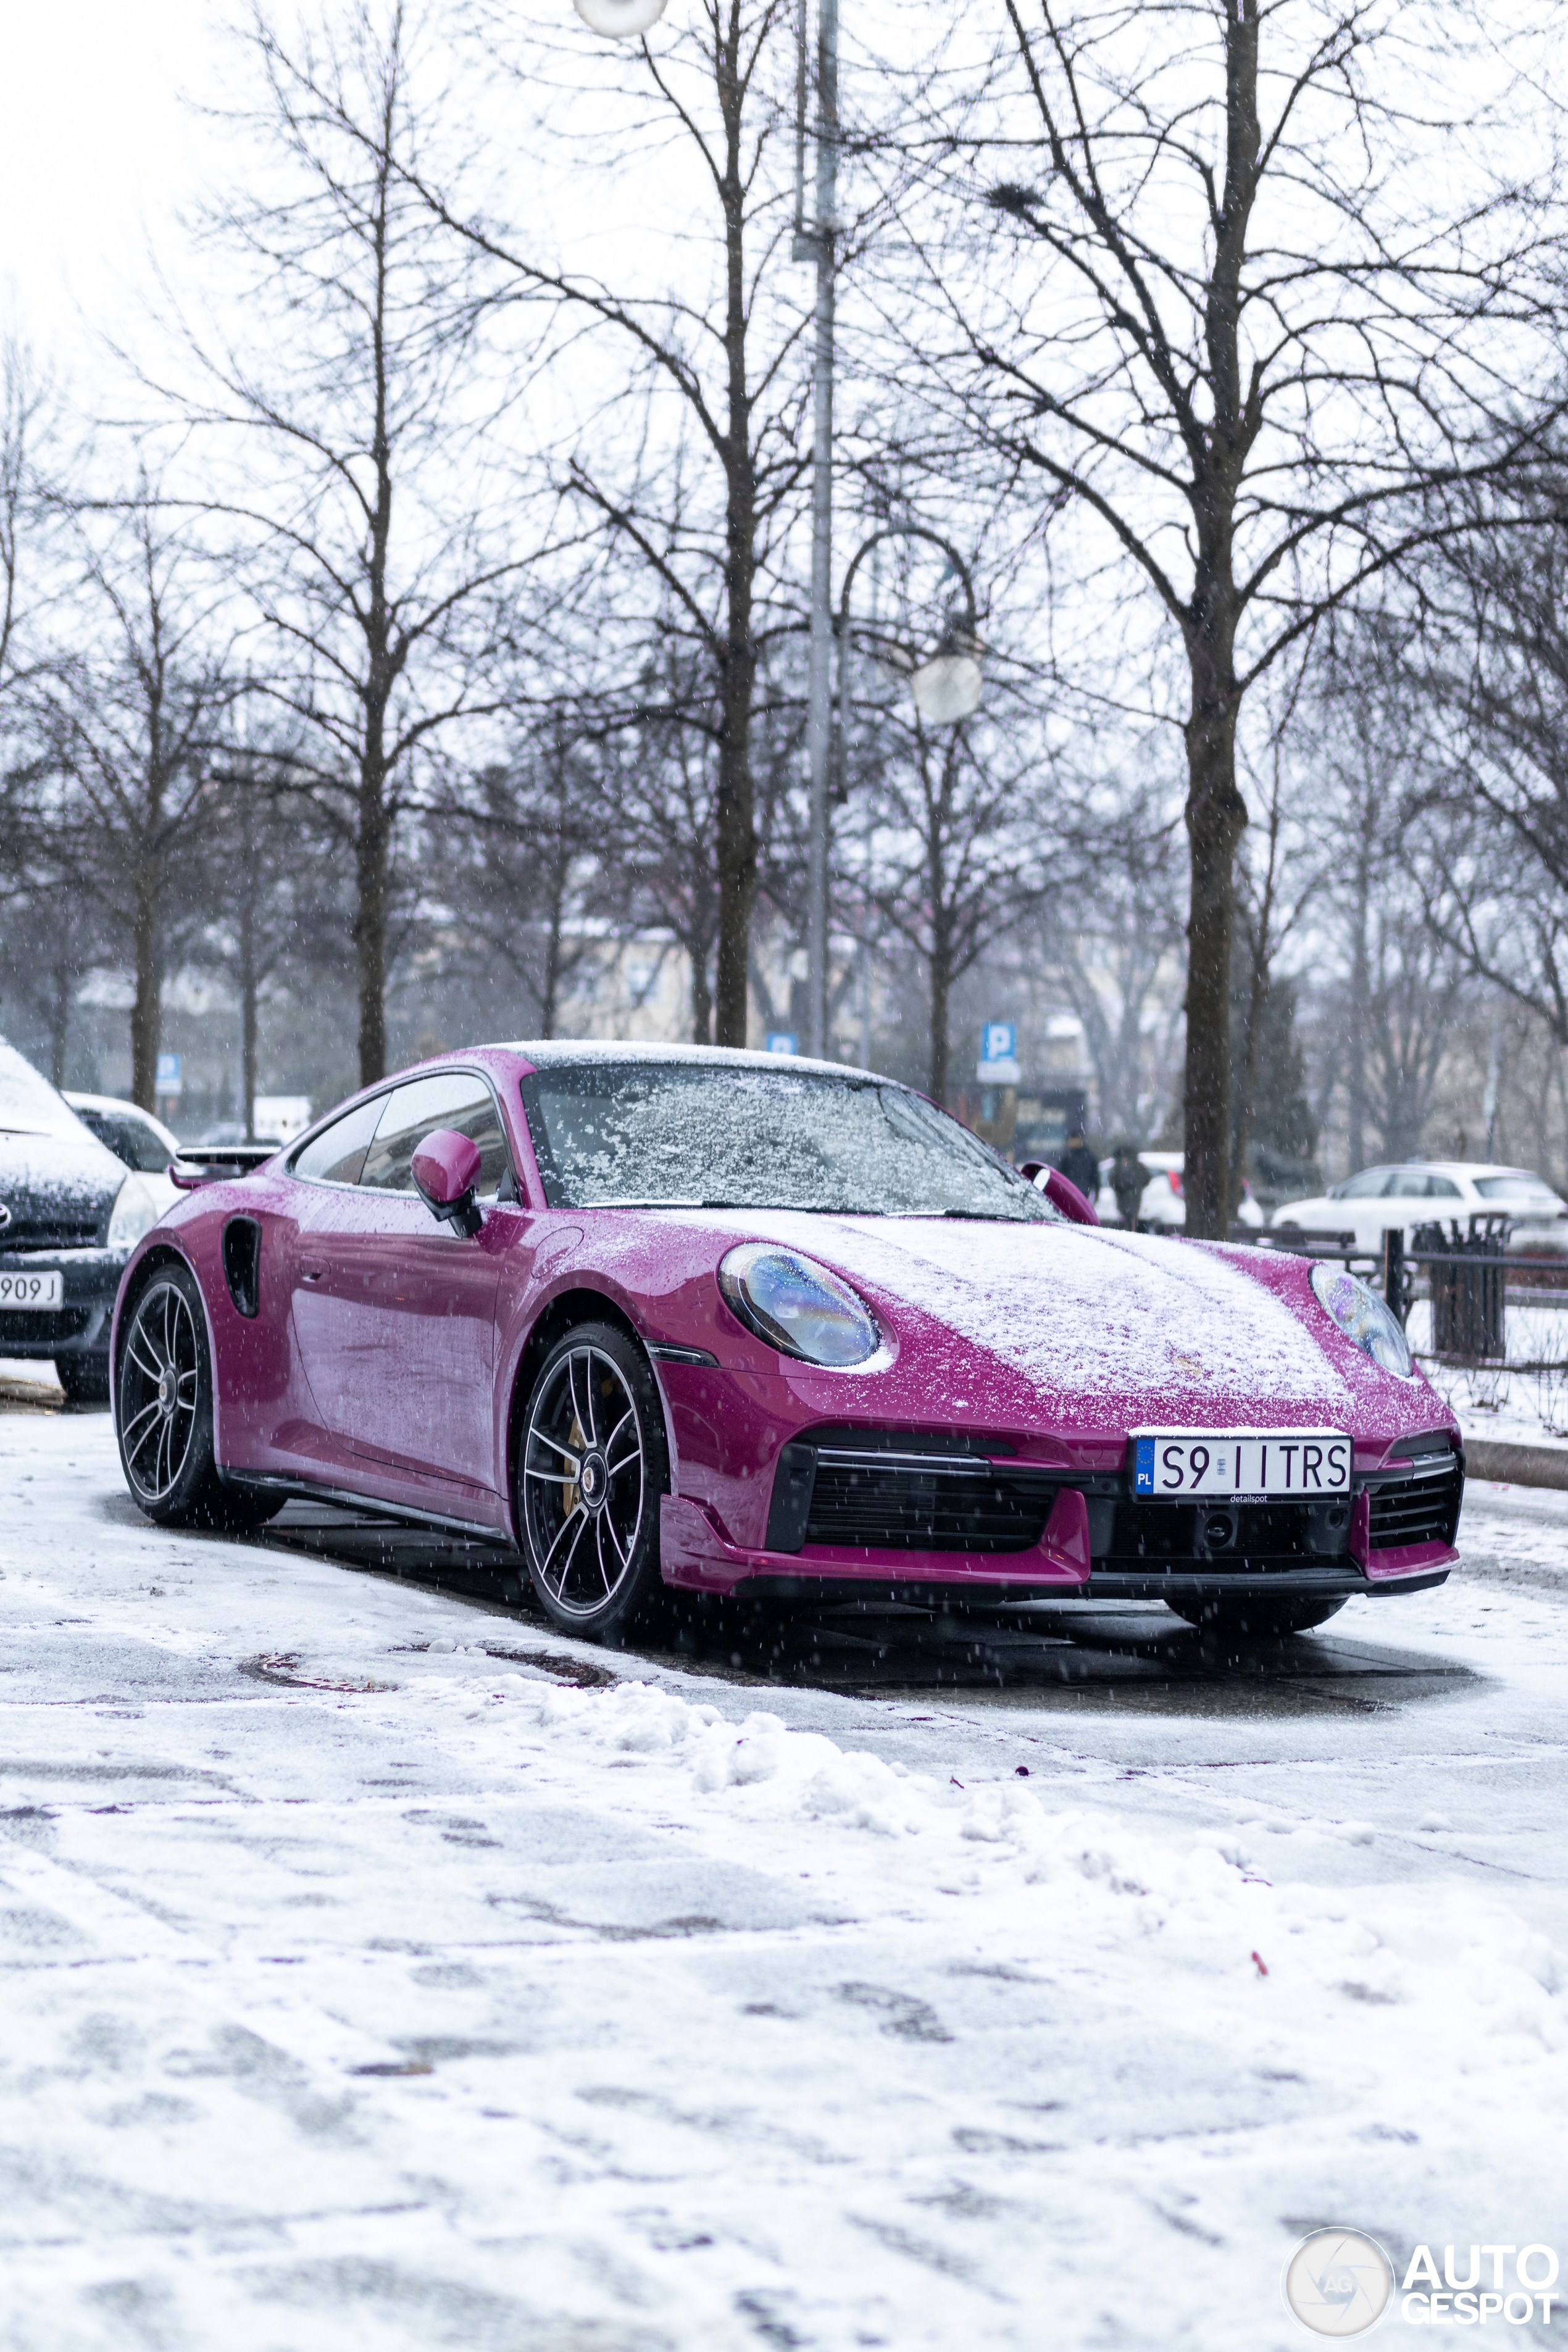 This Turbo S fits perfectly into the winter scene.